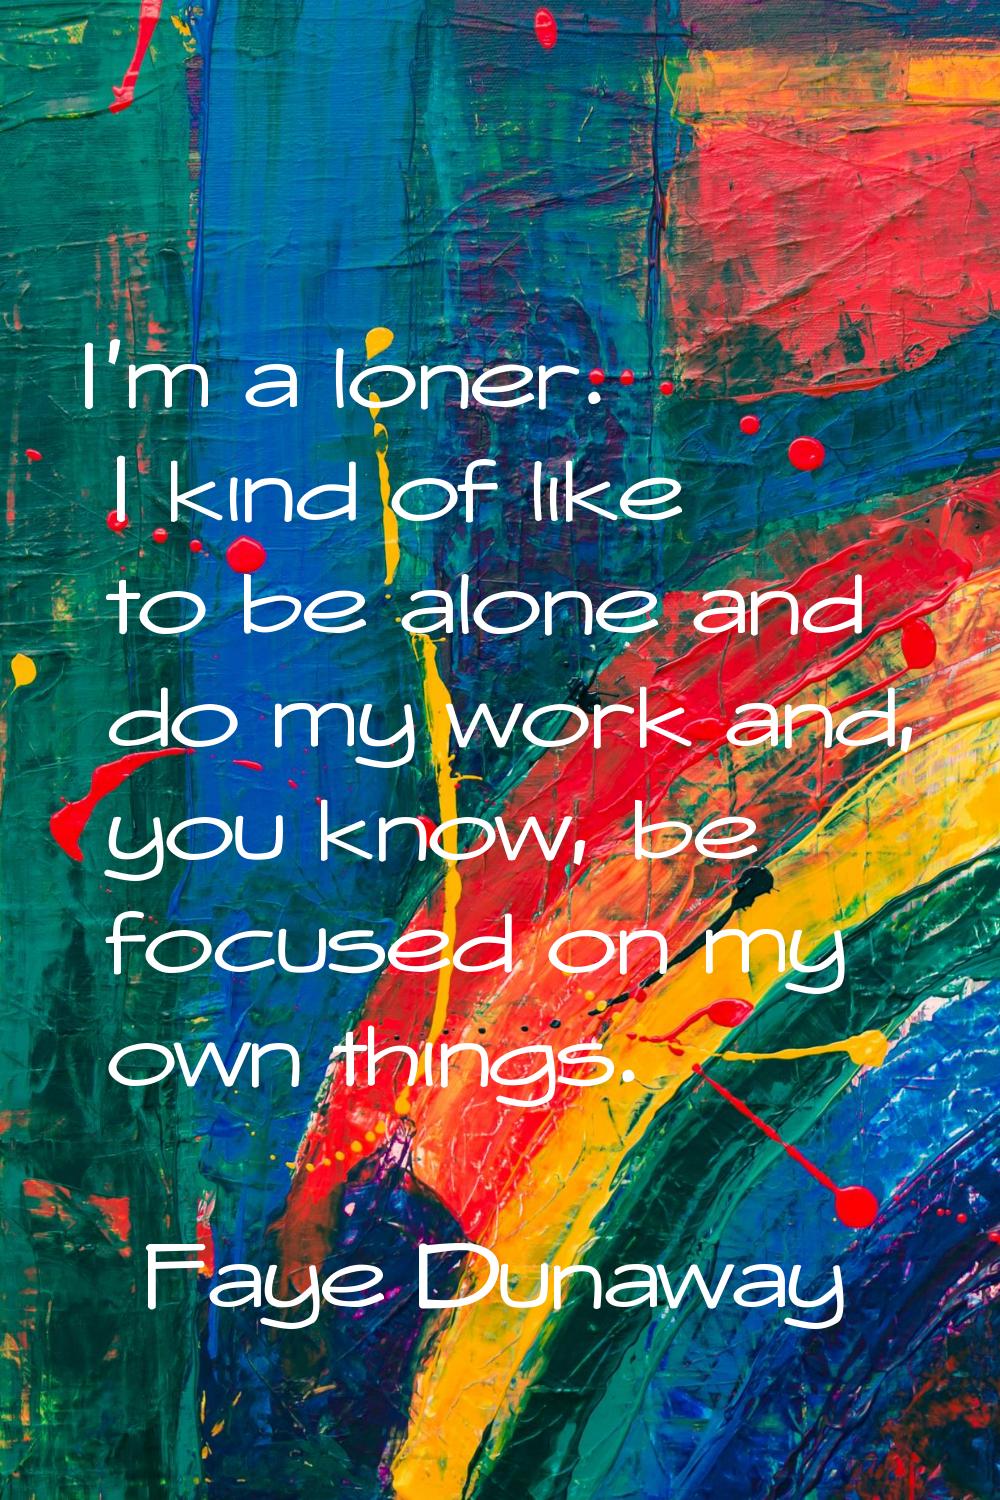 I'm a loner. I kind of like to be alone and do my work and, you know, be focused on my own things.